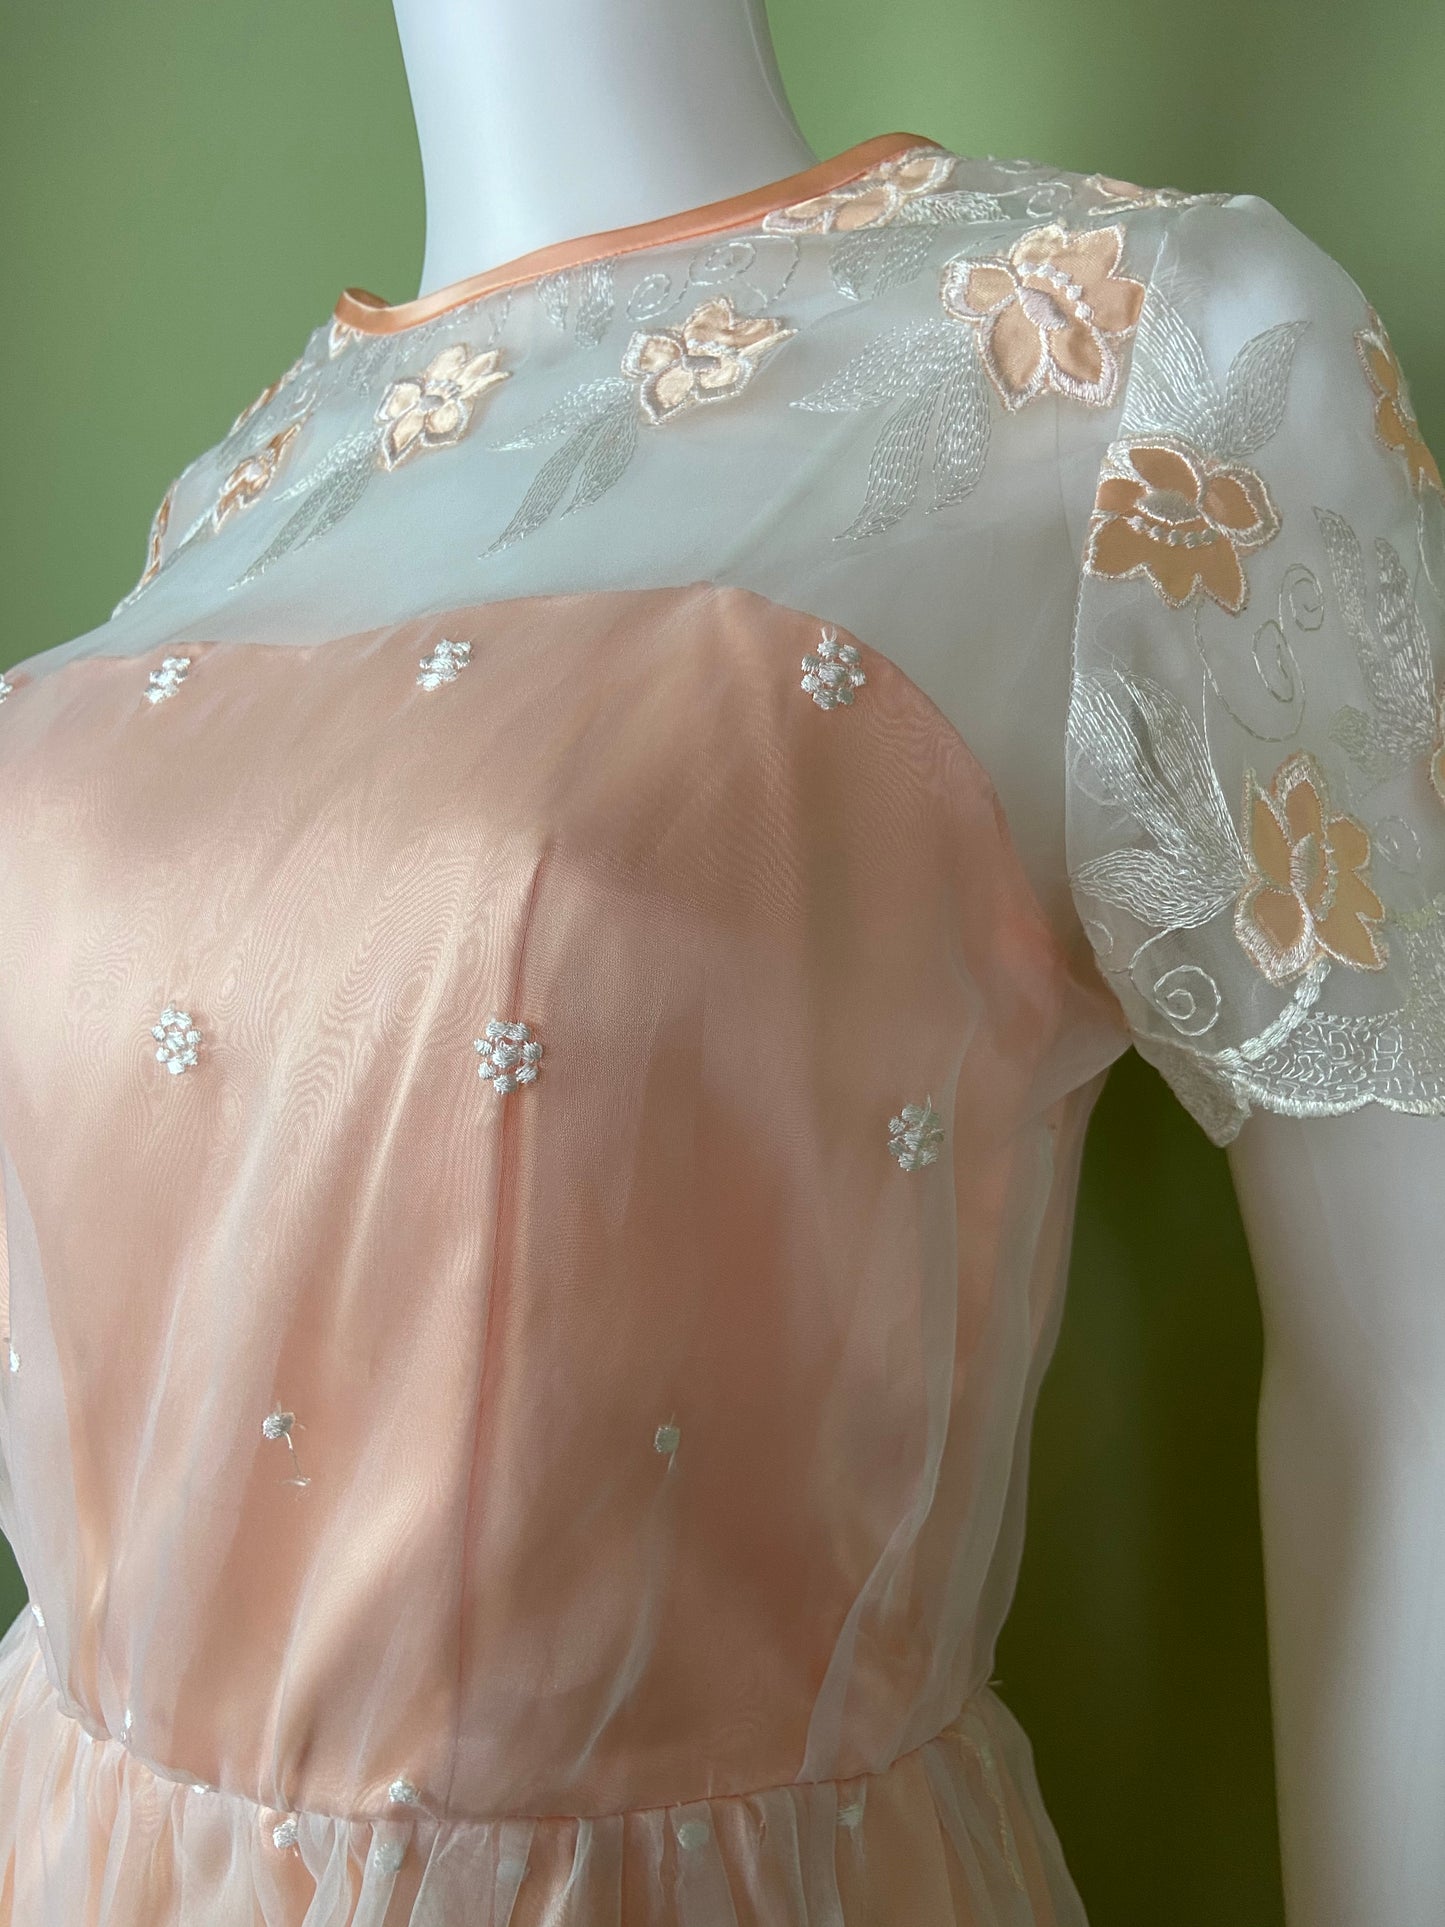 Vintage Victorian Bespoke Pink Peach Satin Sheer Embroidered Floral Lace Dress Gown